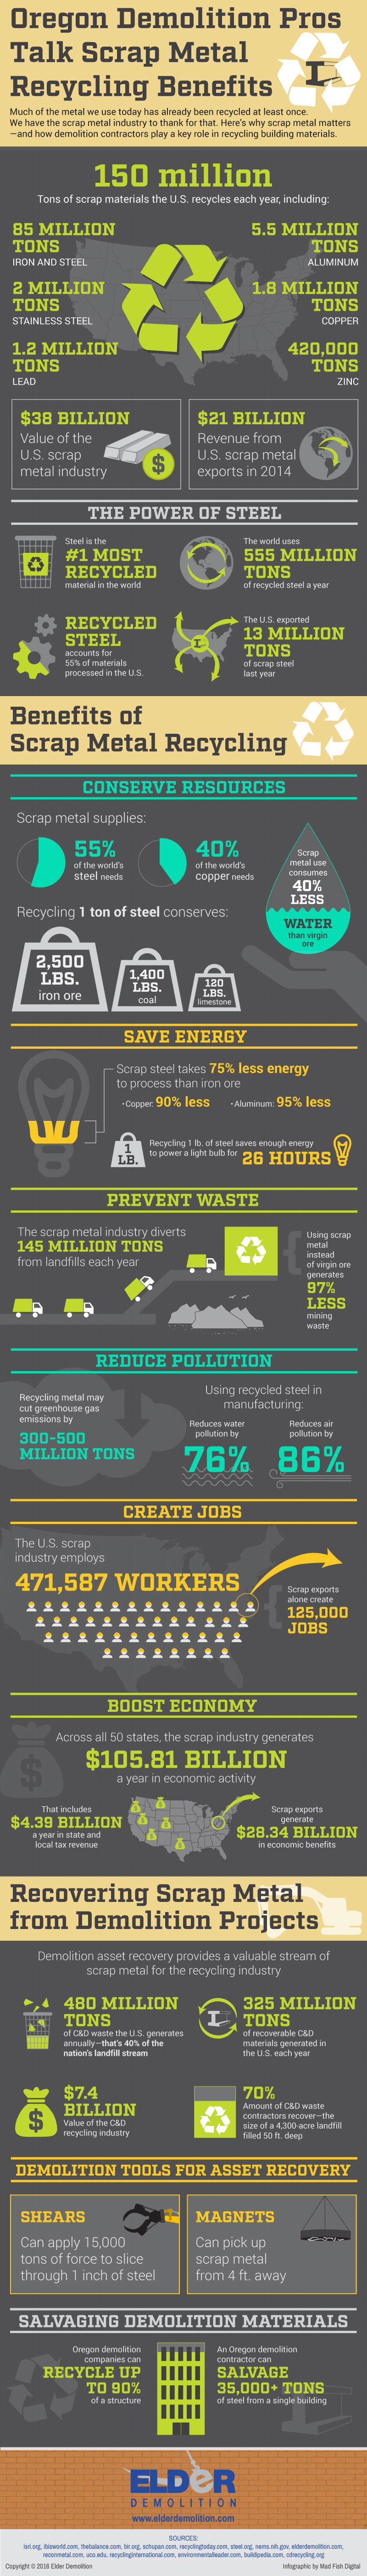 The Benefits of Scrap Metal Recycling